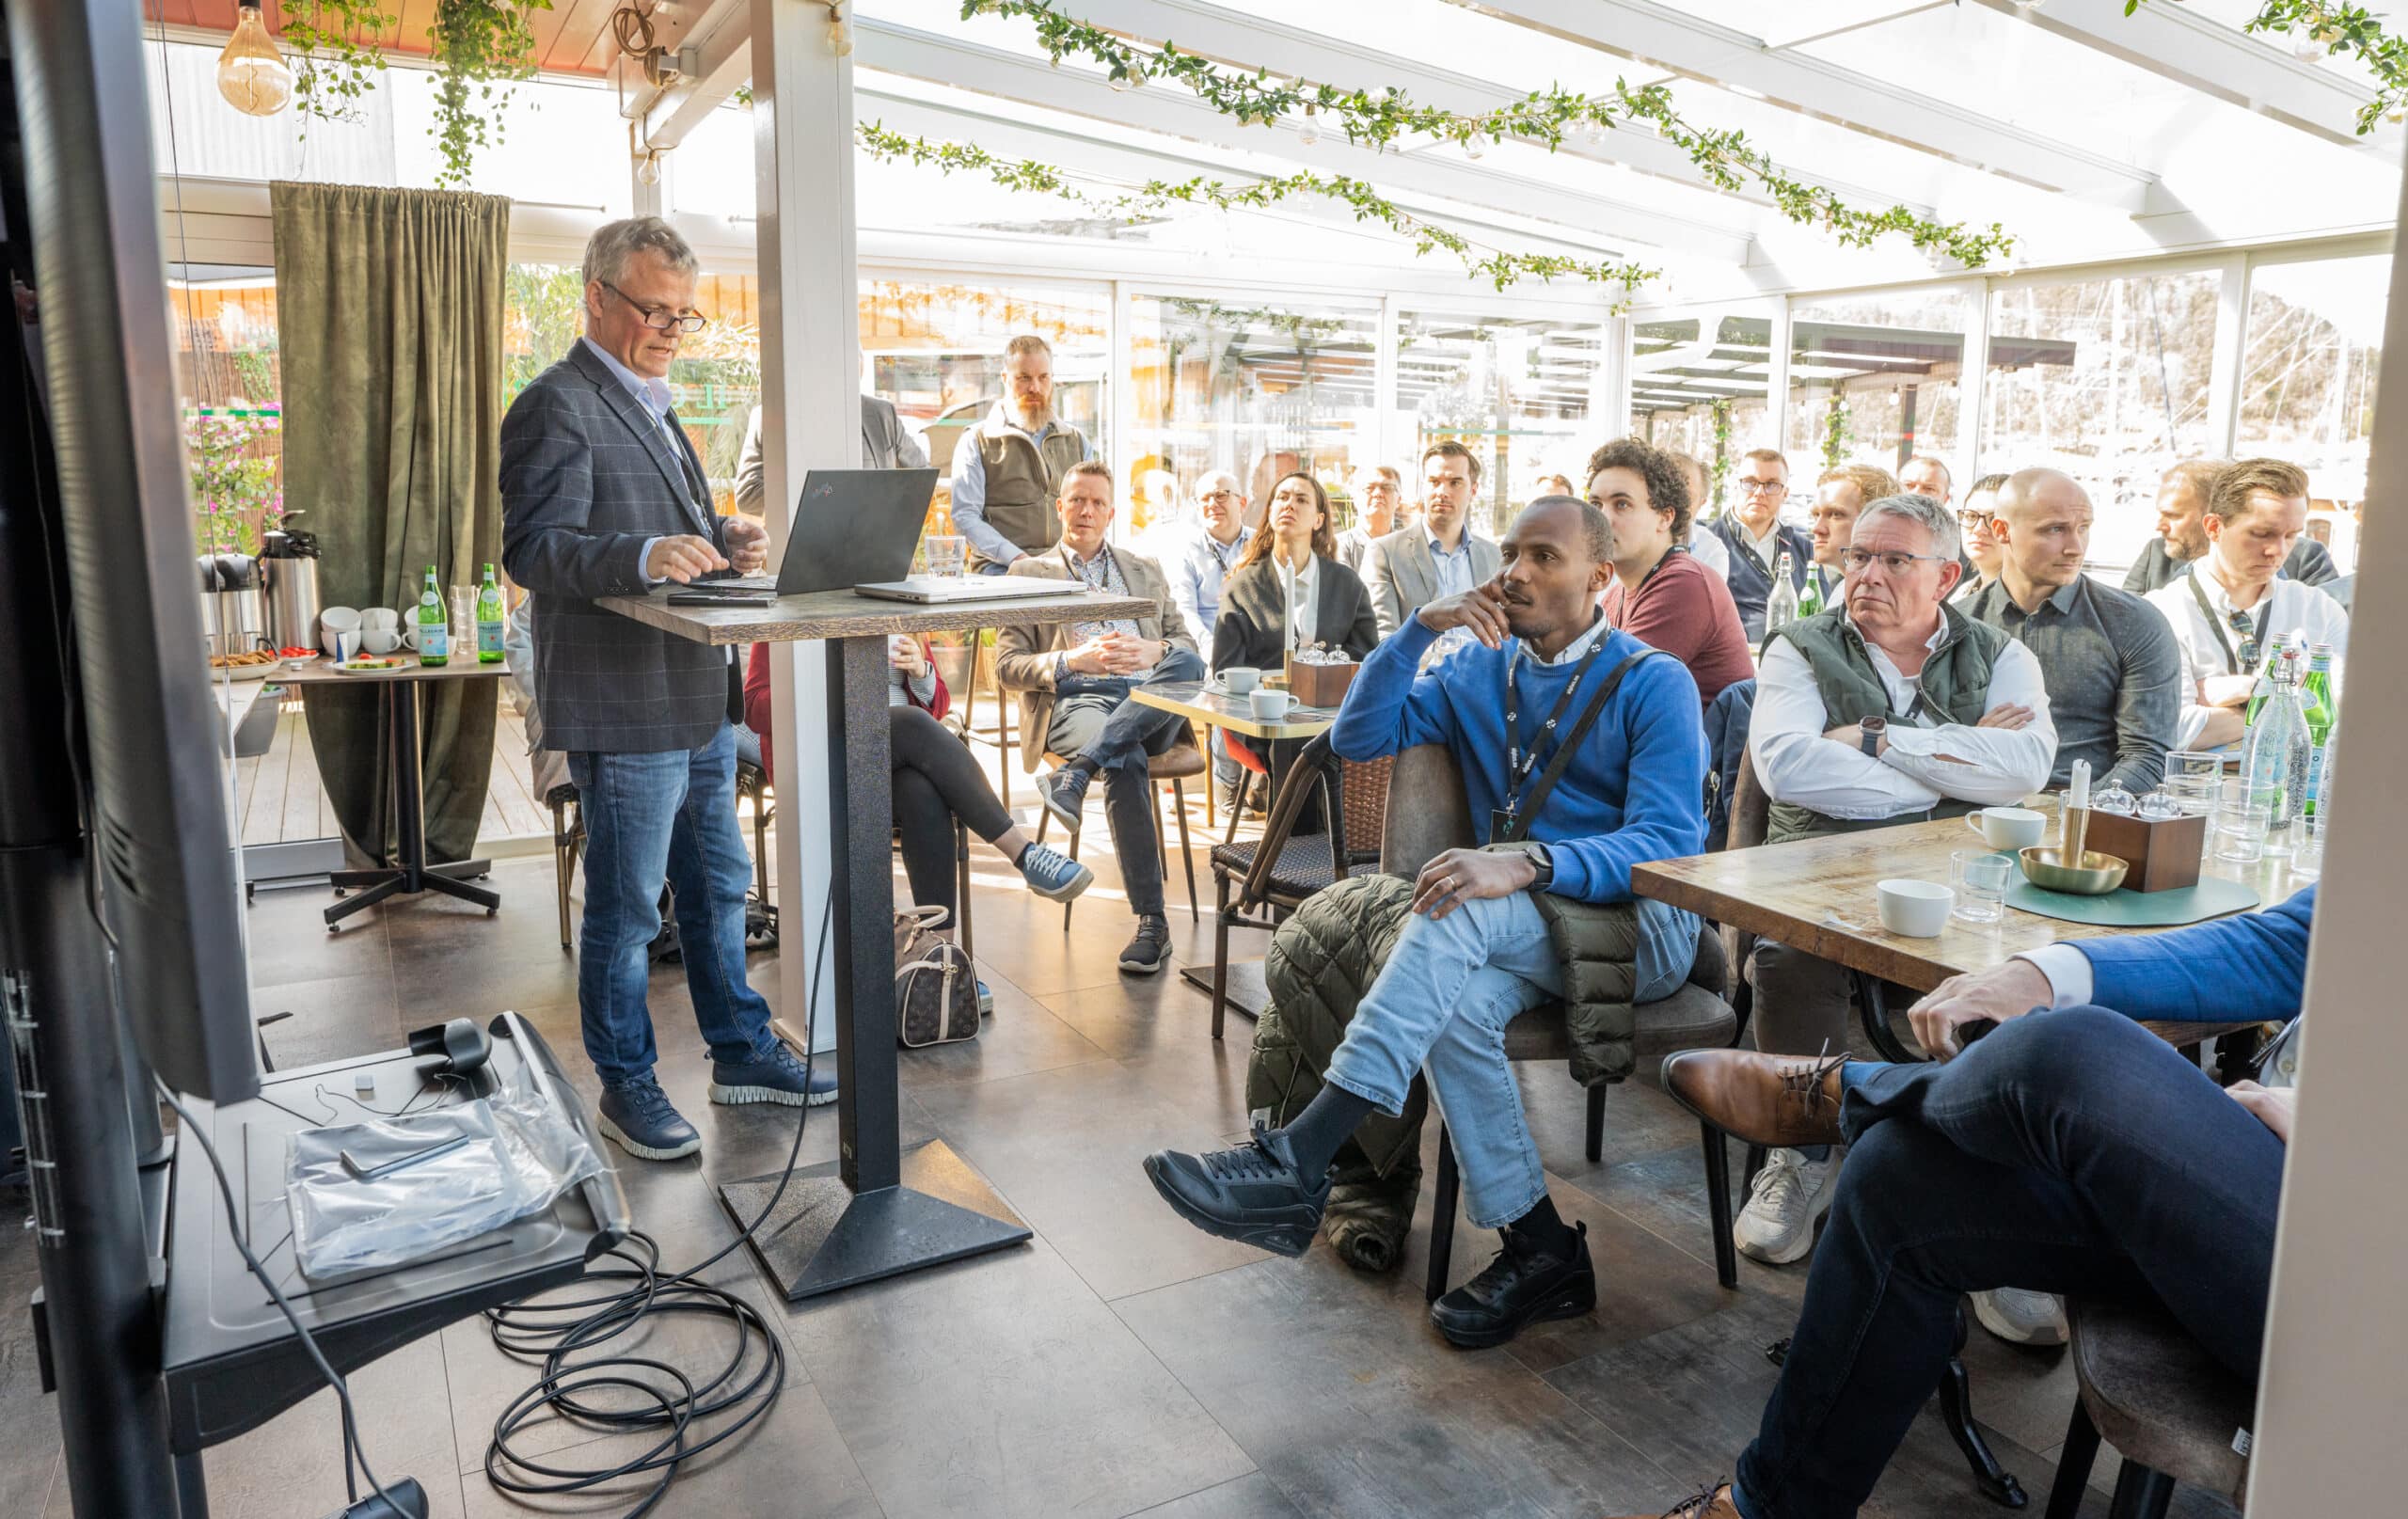 The parallel sessions were located four different places downtown Halden. Here Klas H. Pettersen from NORA presented at Il Casolare, a restaurant by the harbour. PHOTO: Stein Johnsen, ContentVideo